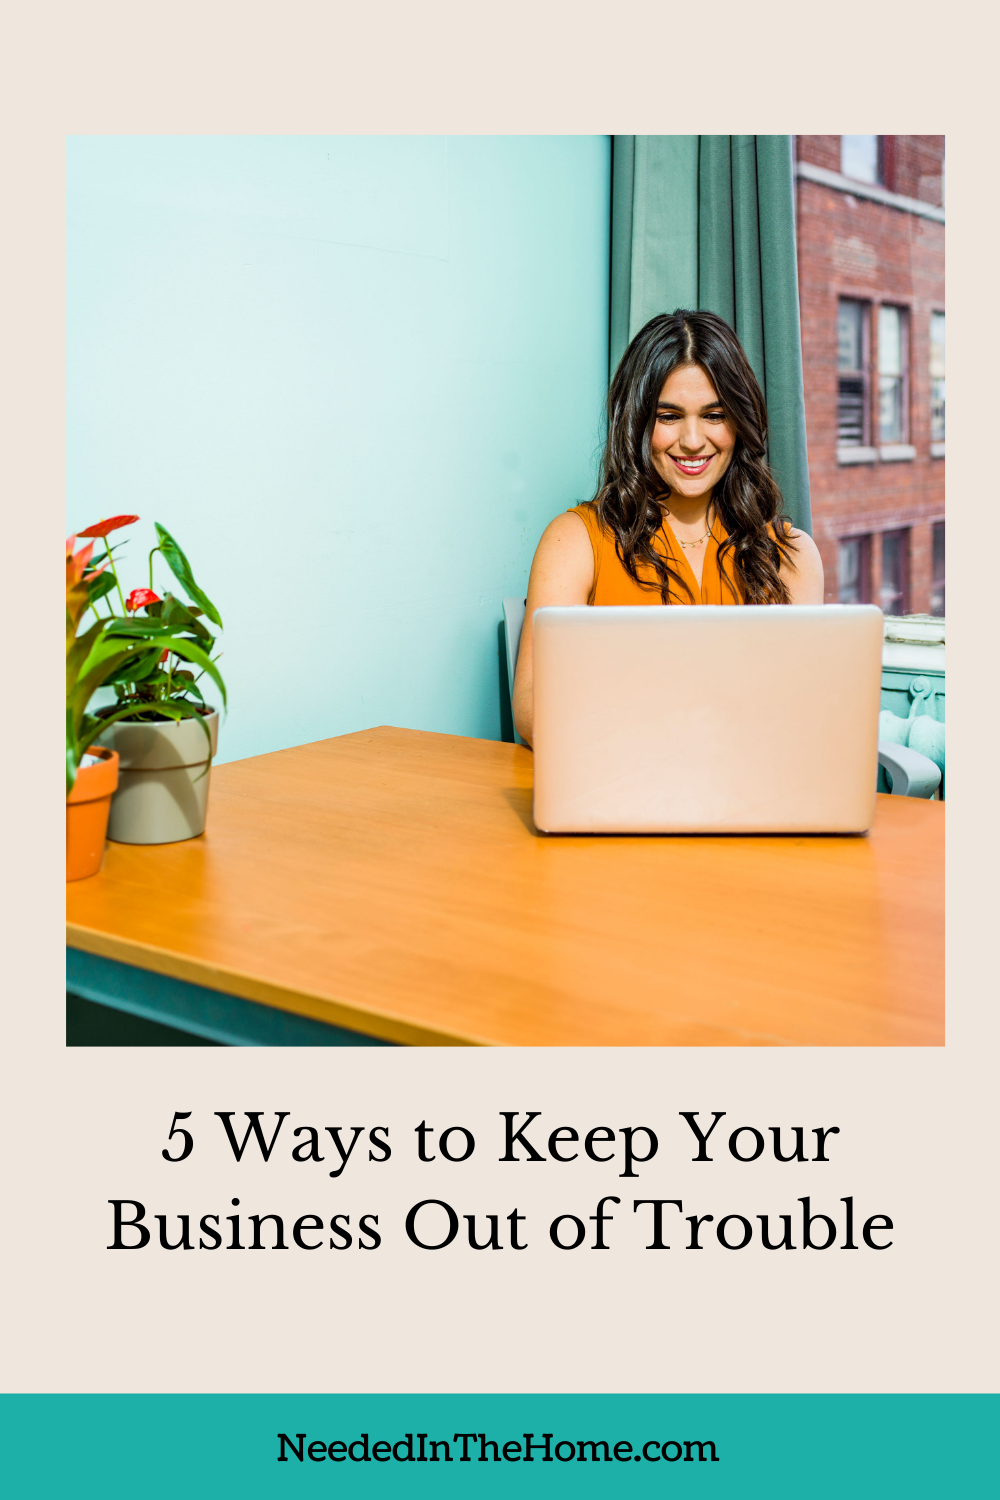 pinterest-pin-description smiling woman working at laptop desk plants 5 ways to keep your business out of trouble neededinthehome